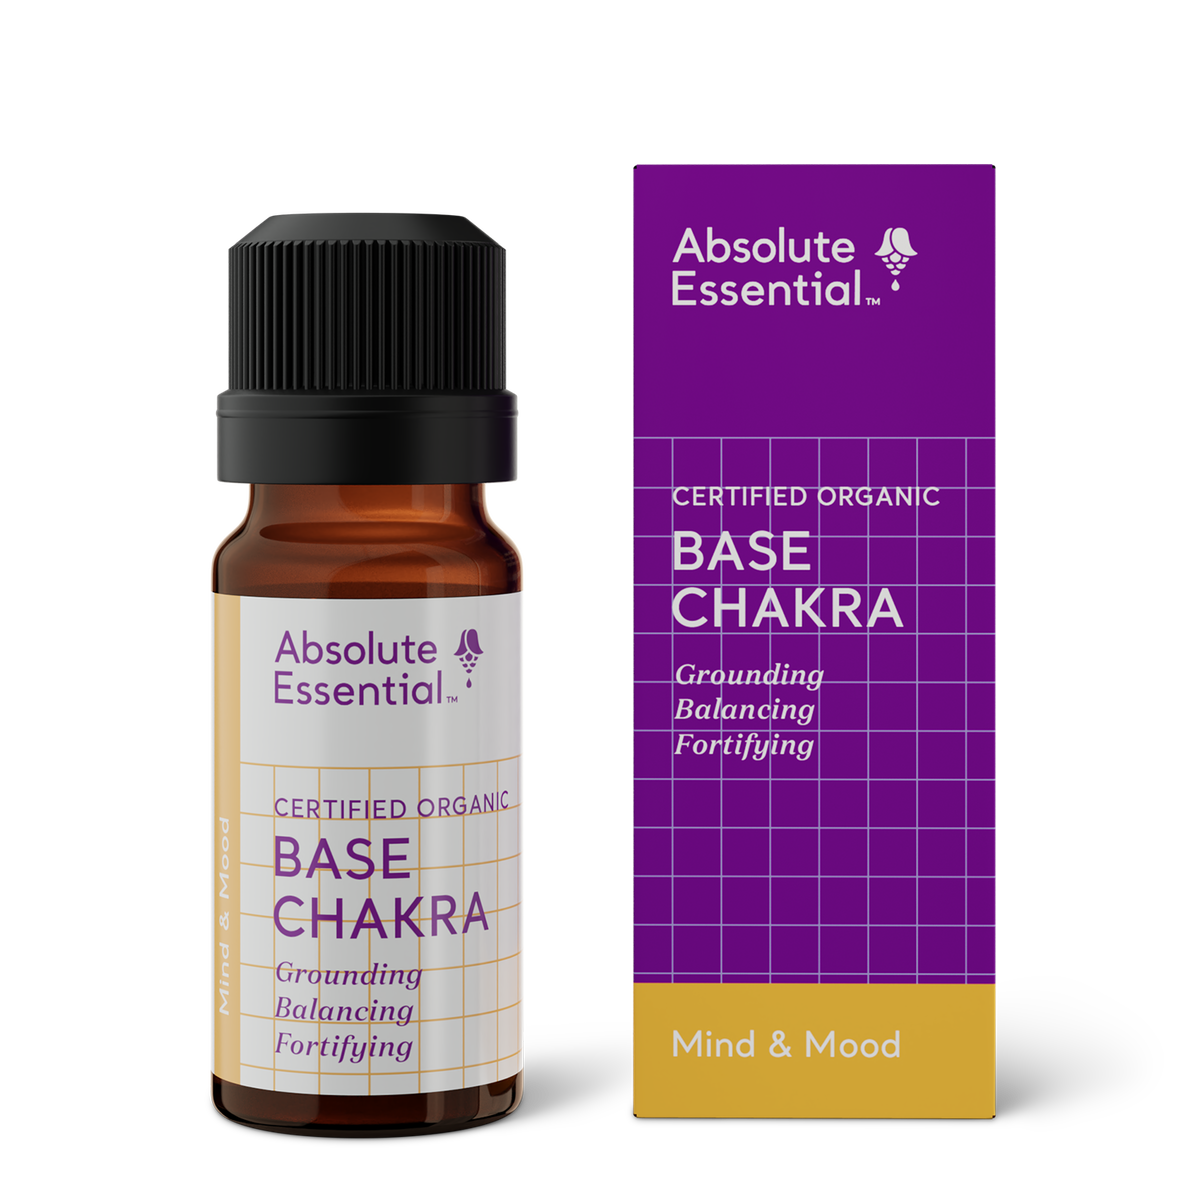 Absolute Essential Base Chakra Oil